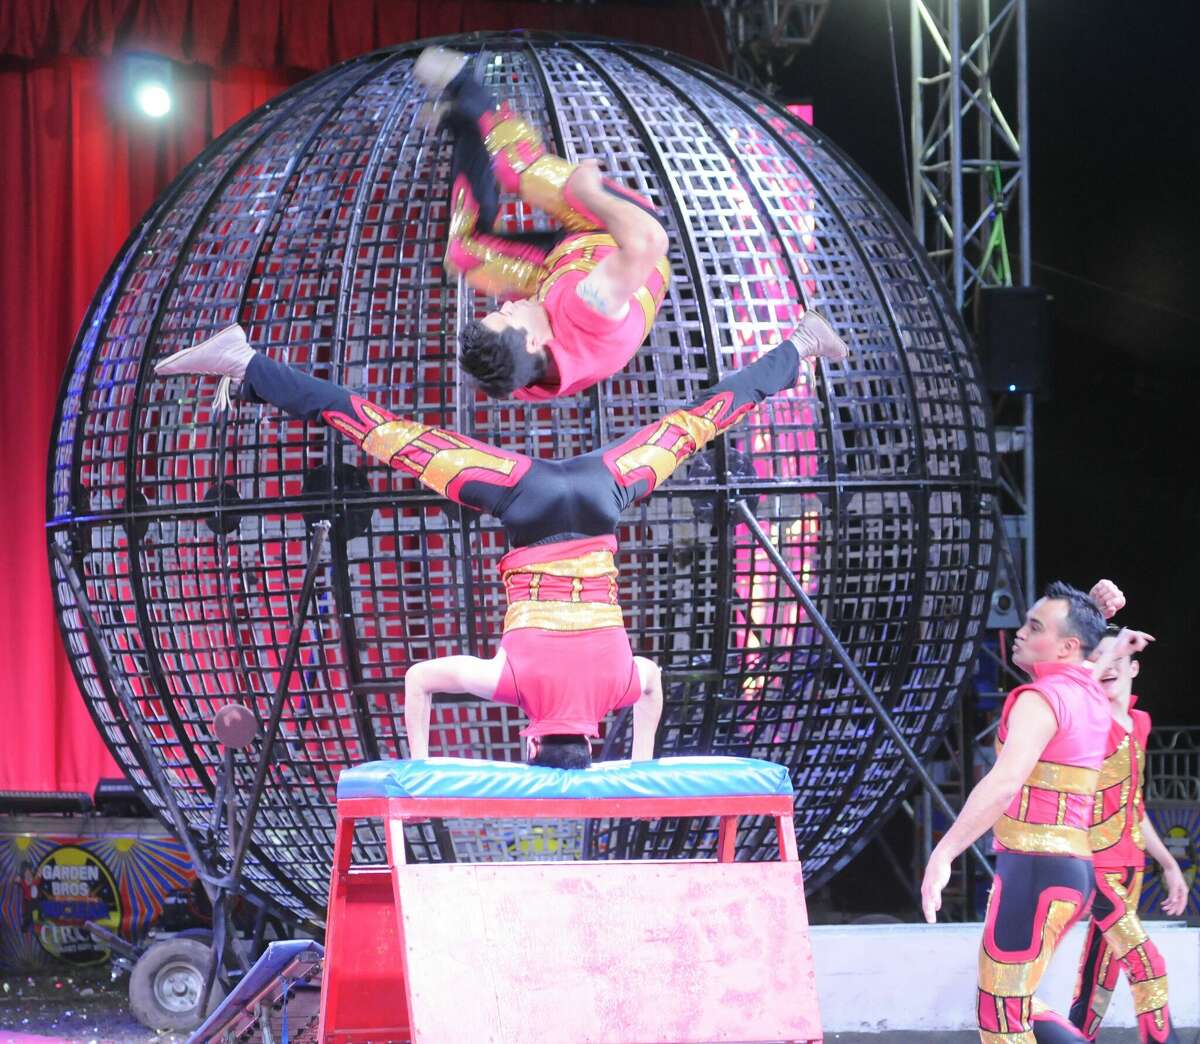 Garden Bros. Circus performers show off their skills Saturday in Granite City.